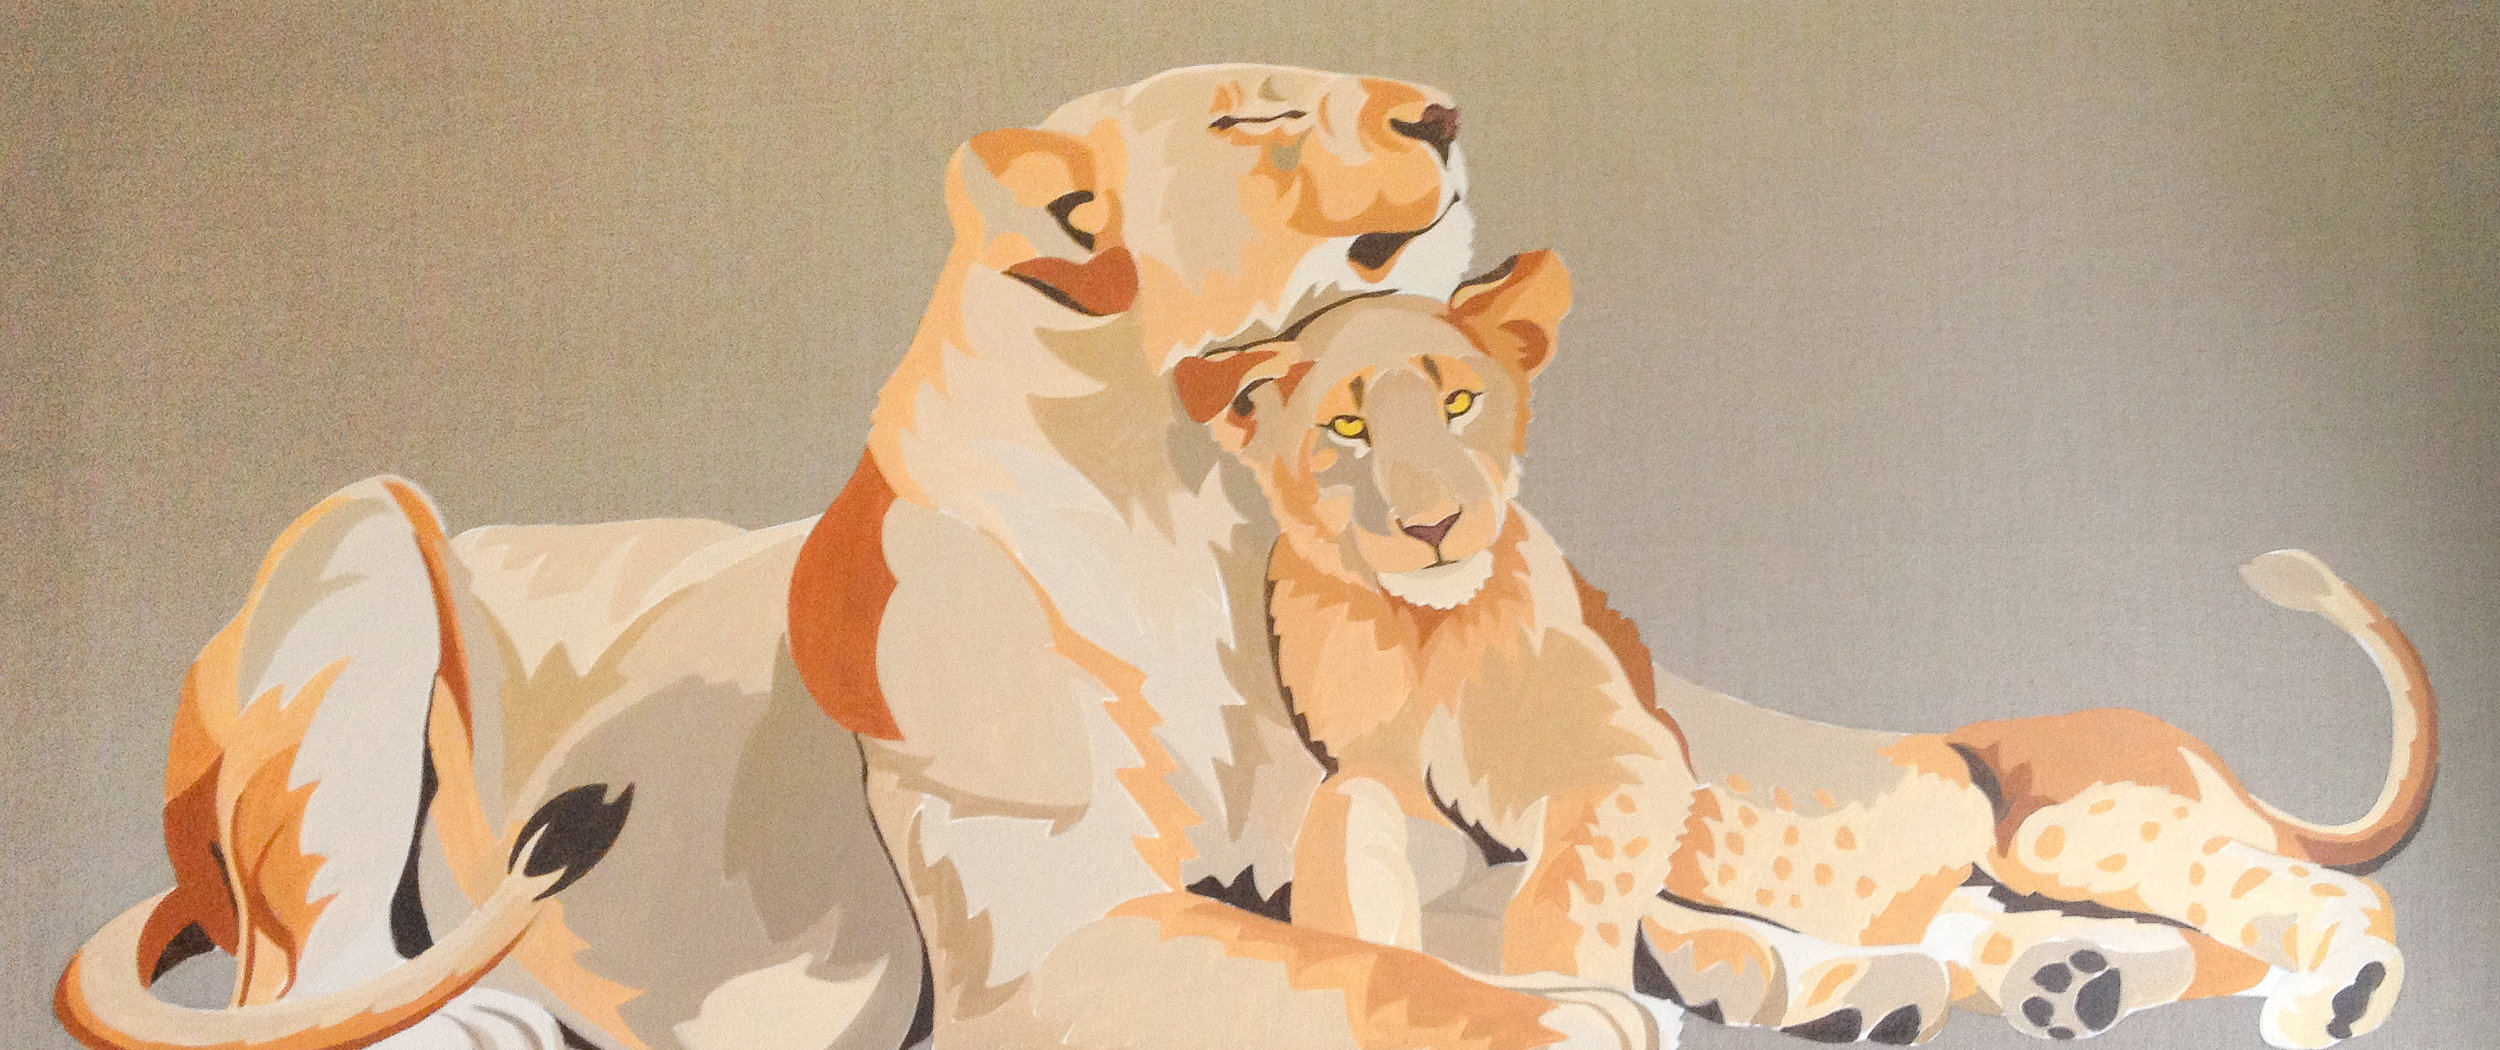 Lion and Cub painting 1-5.jpg